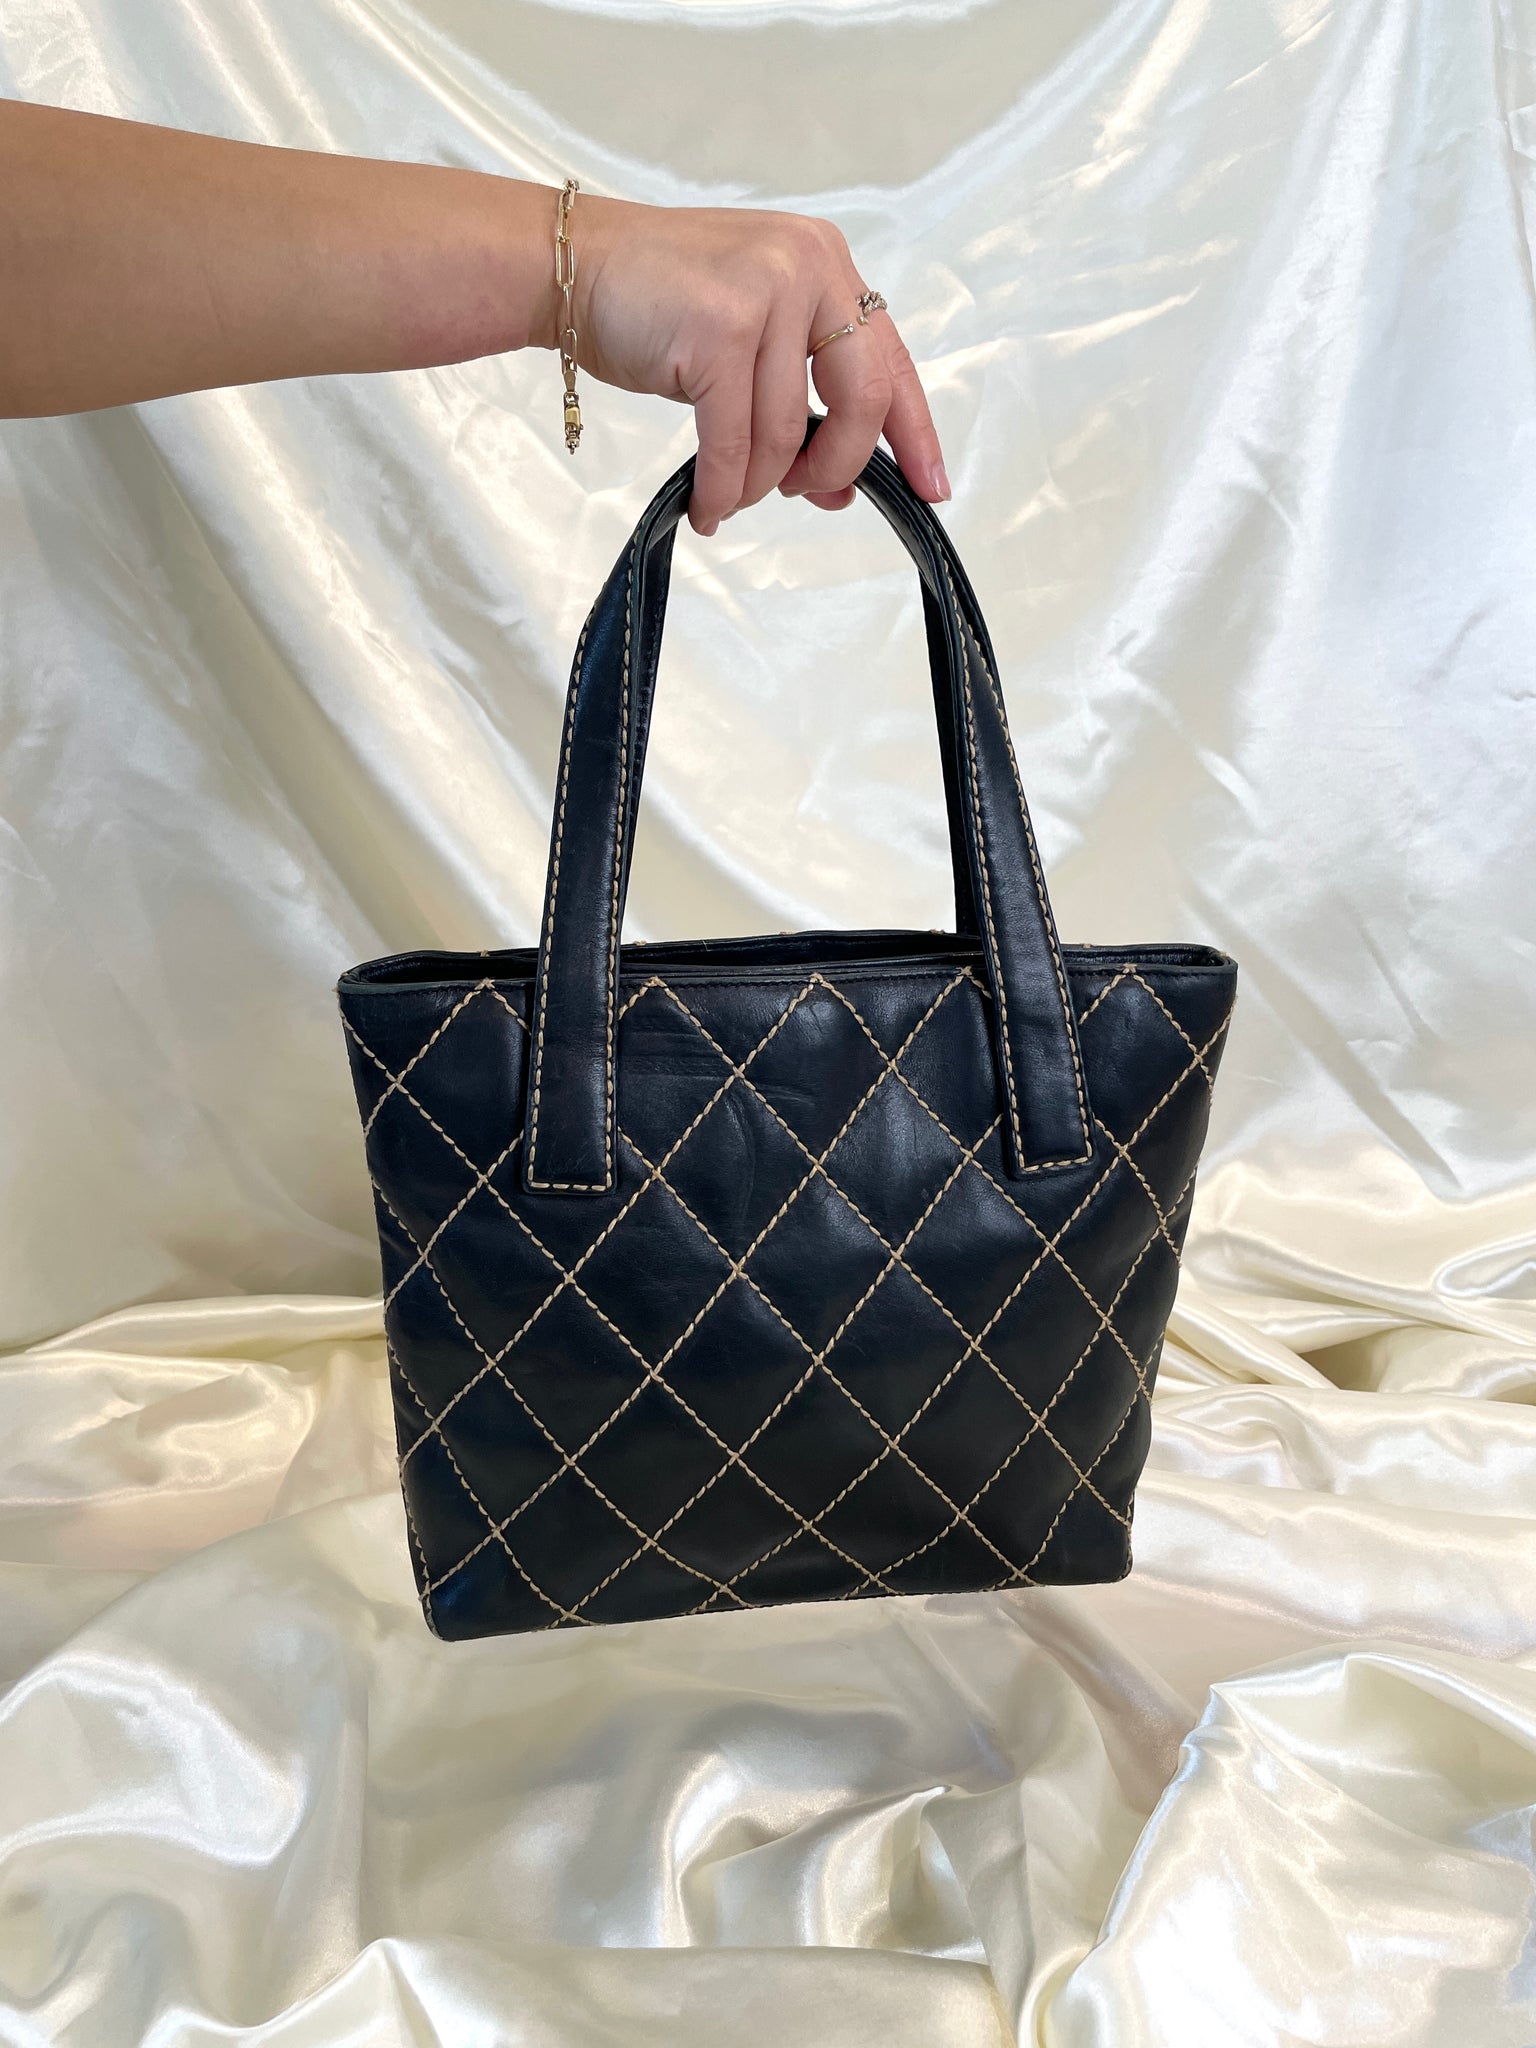 Chanel Surpique Quilted Tote